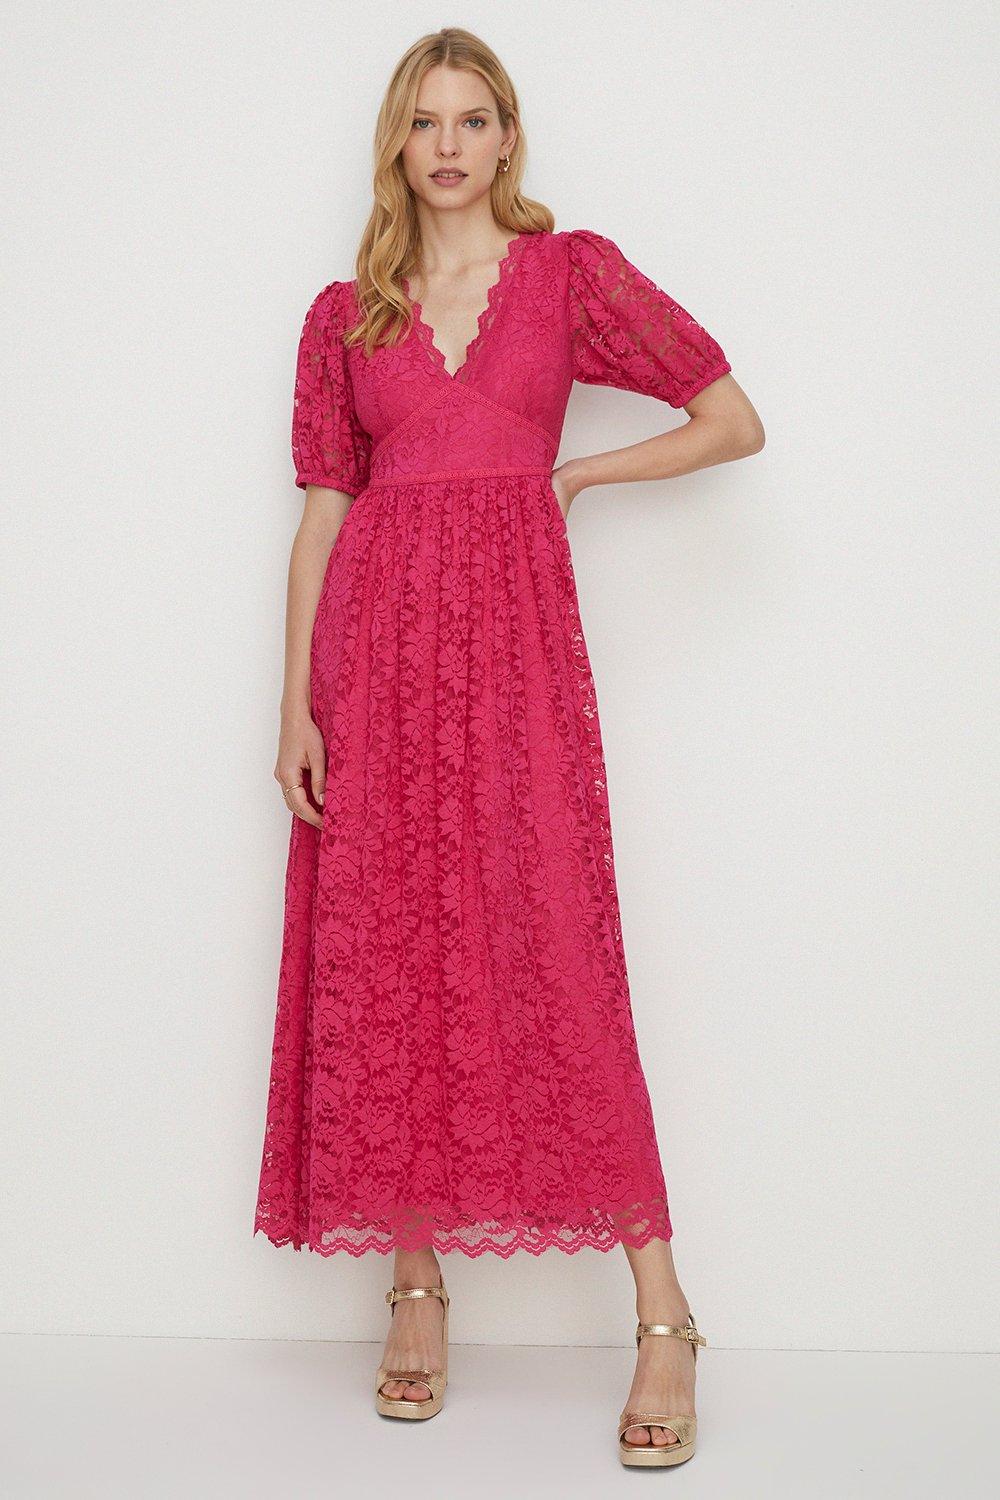 Lace Puff Sleeve V Neck Midaxi Dress